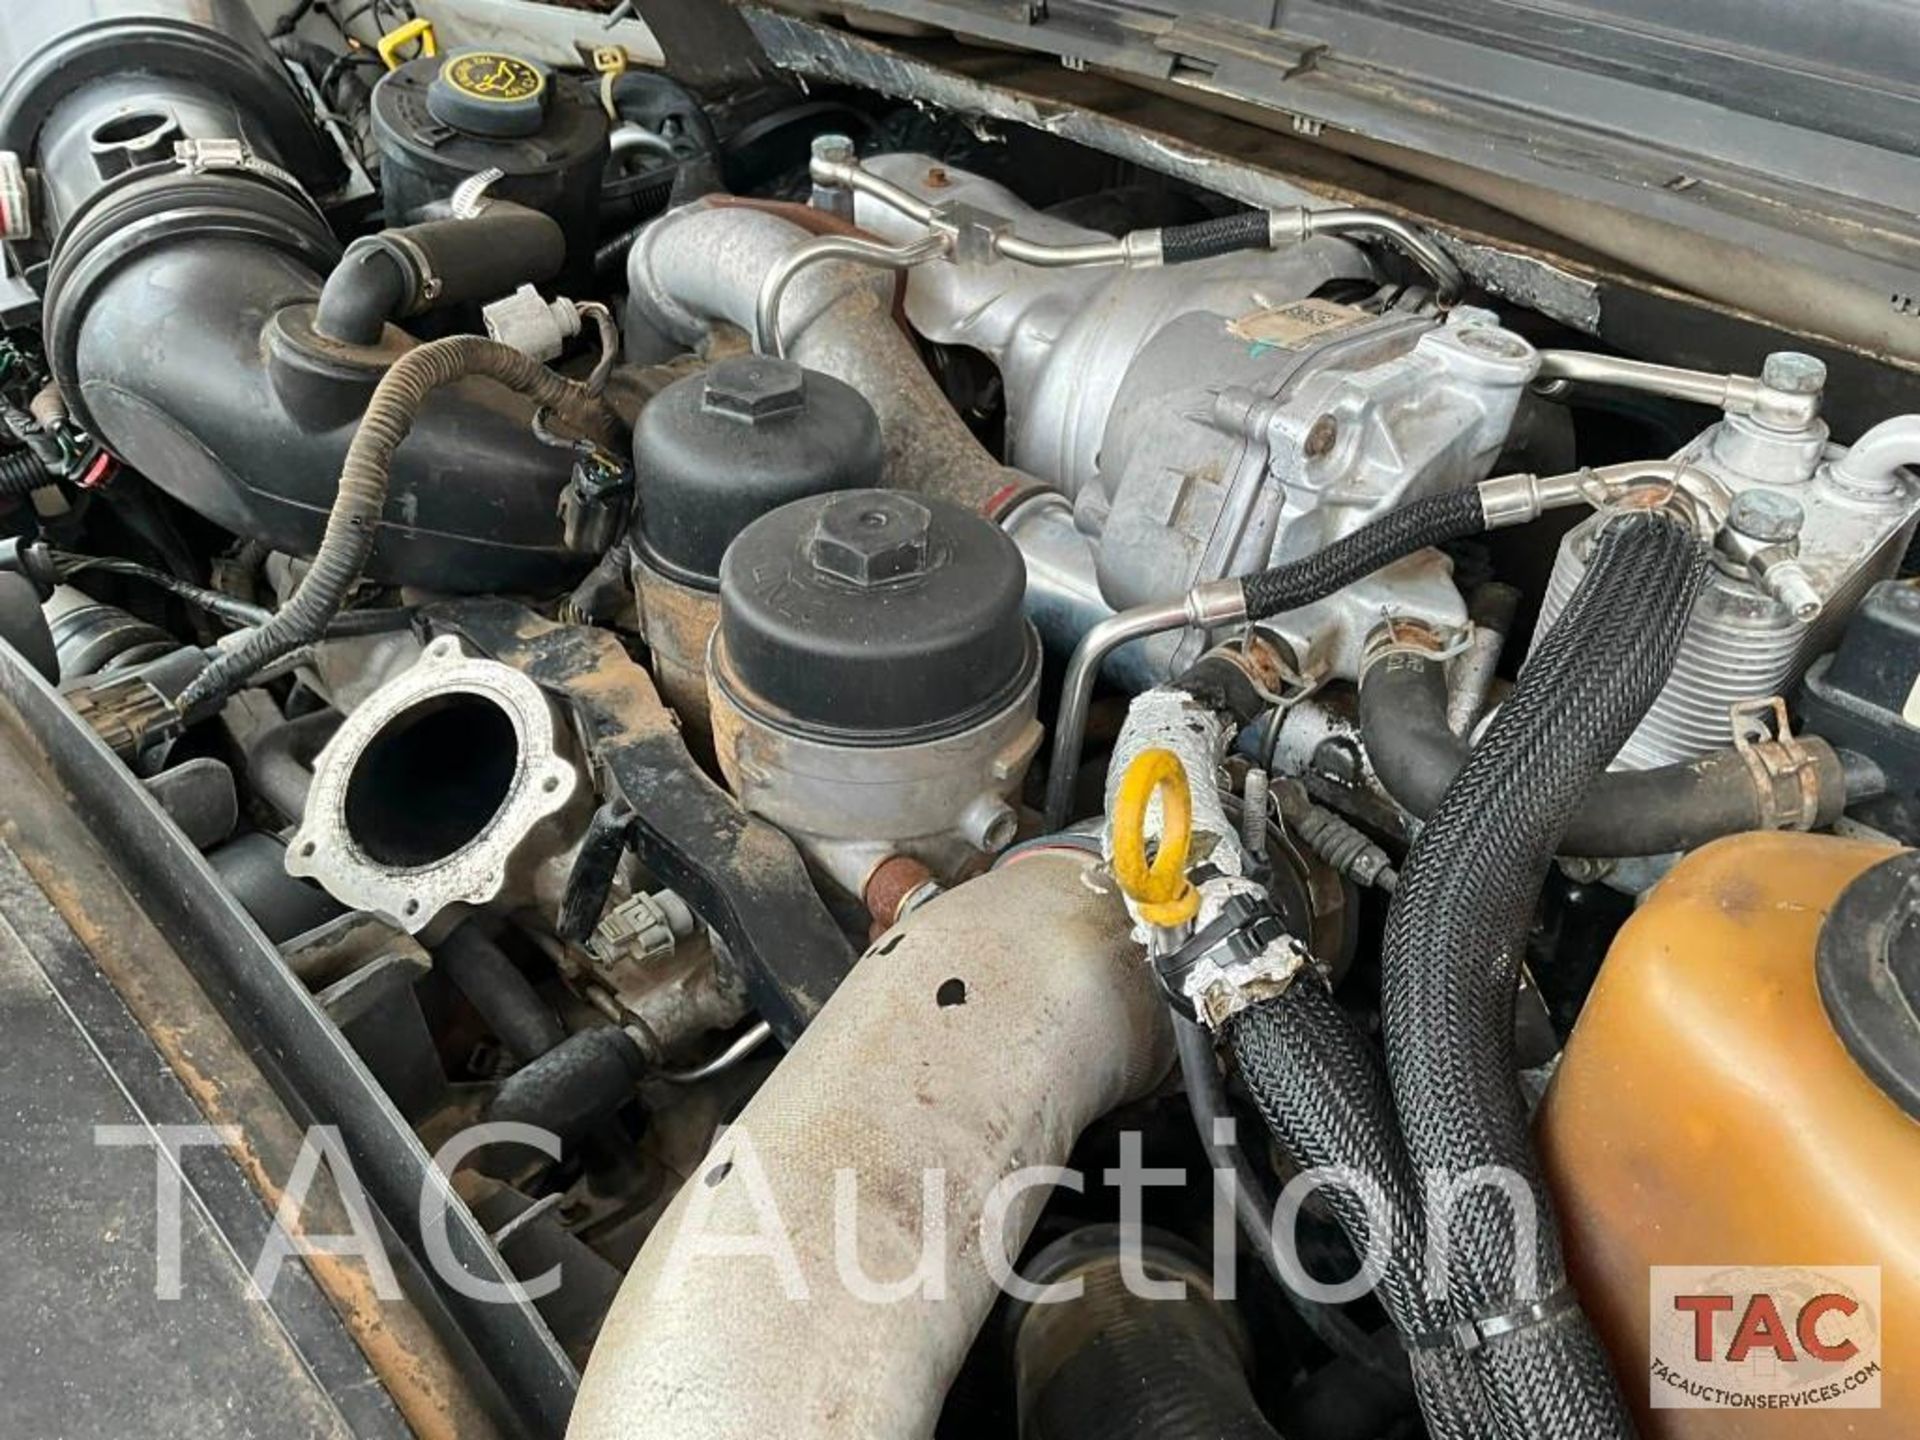 2008 Ford F-350 Super Duty Service Truck - Image 94 of 124